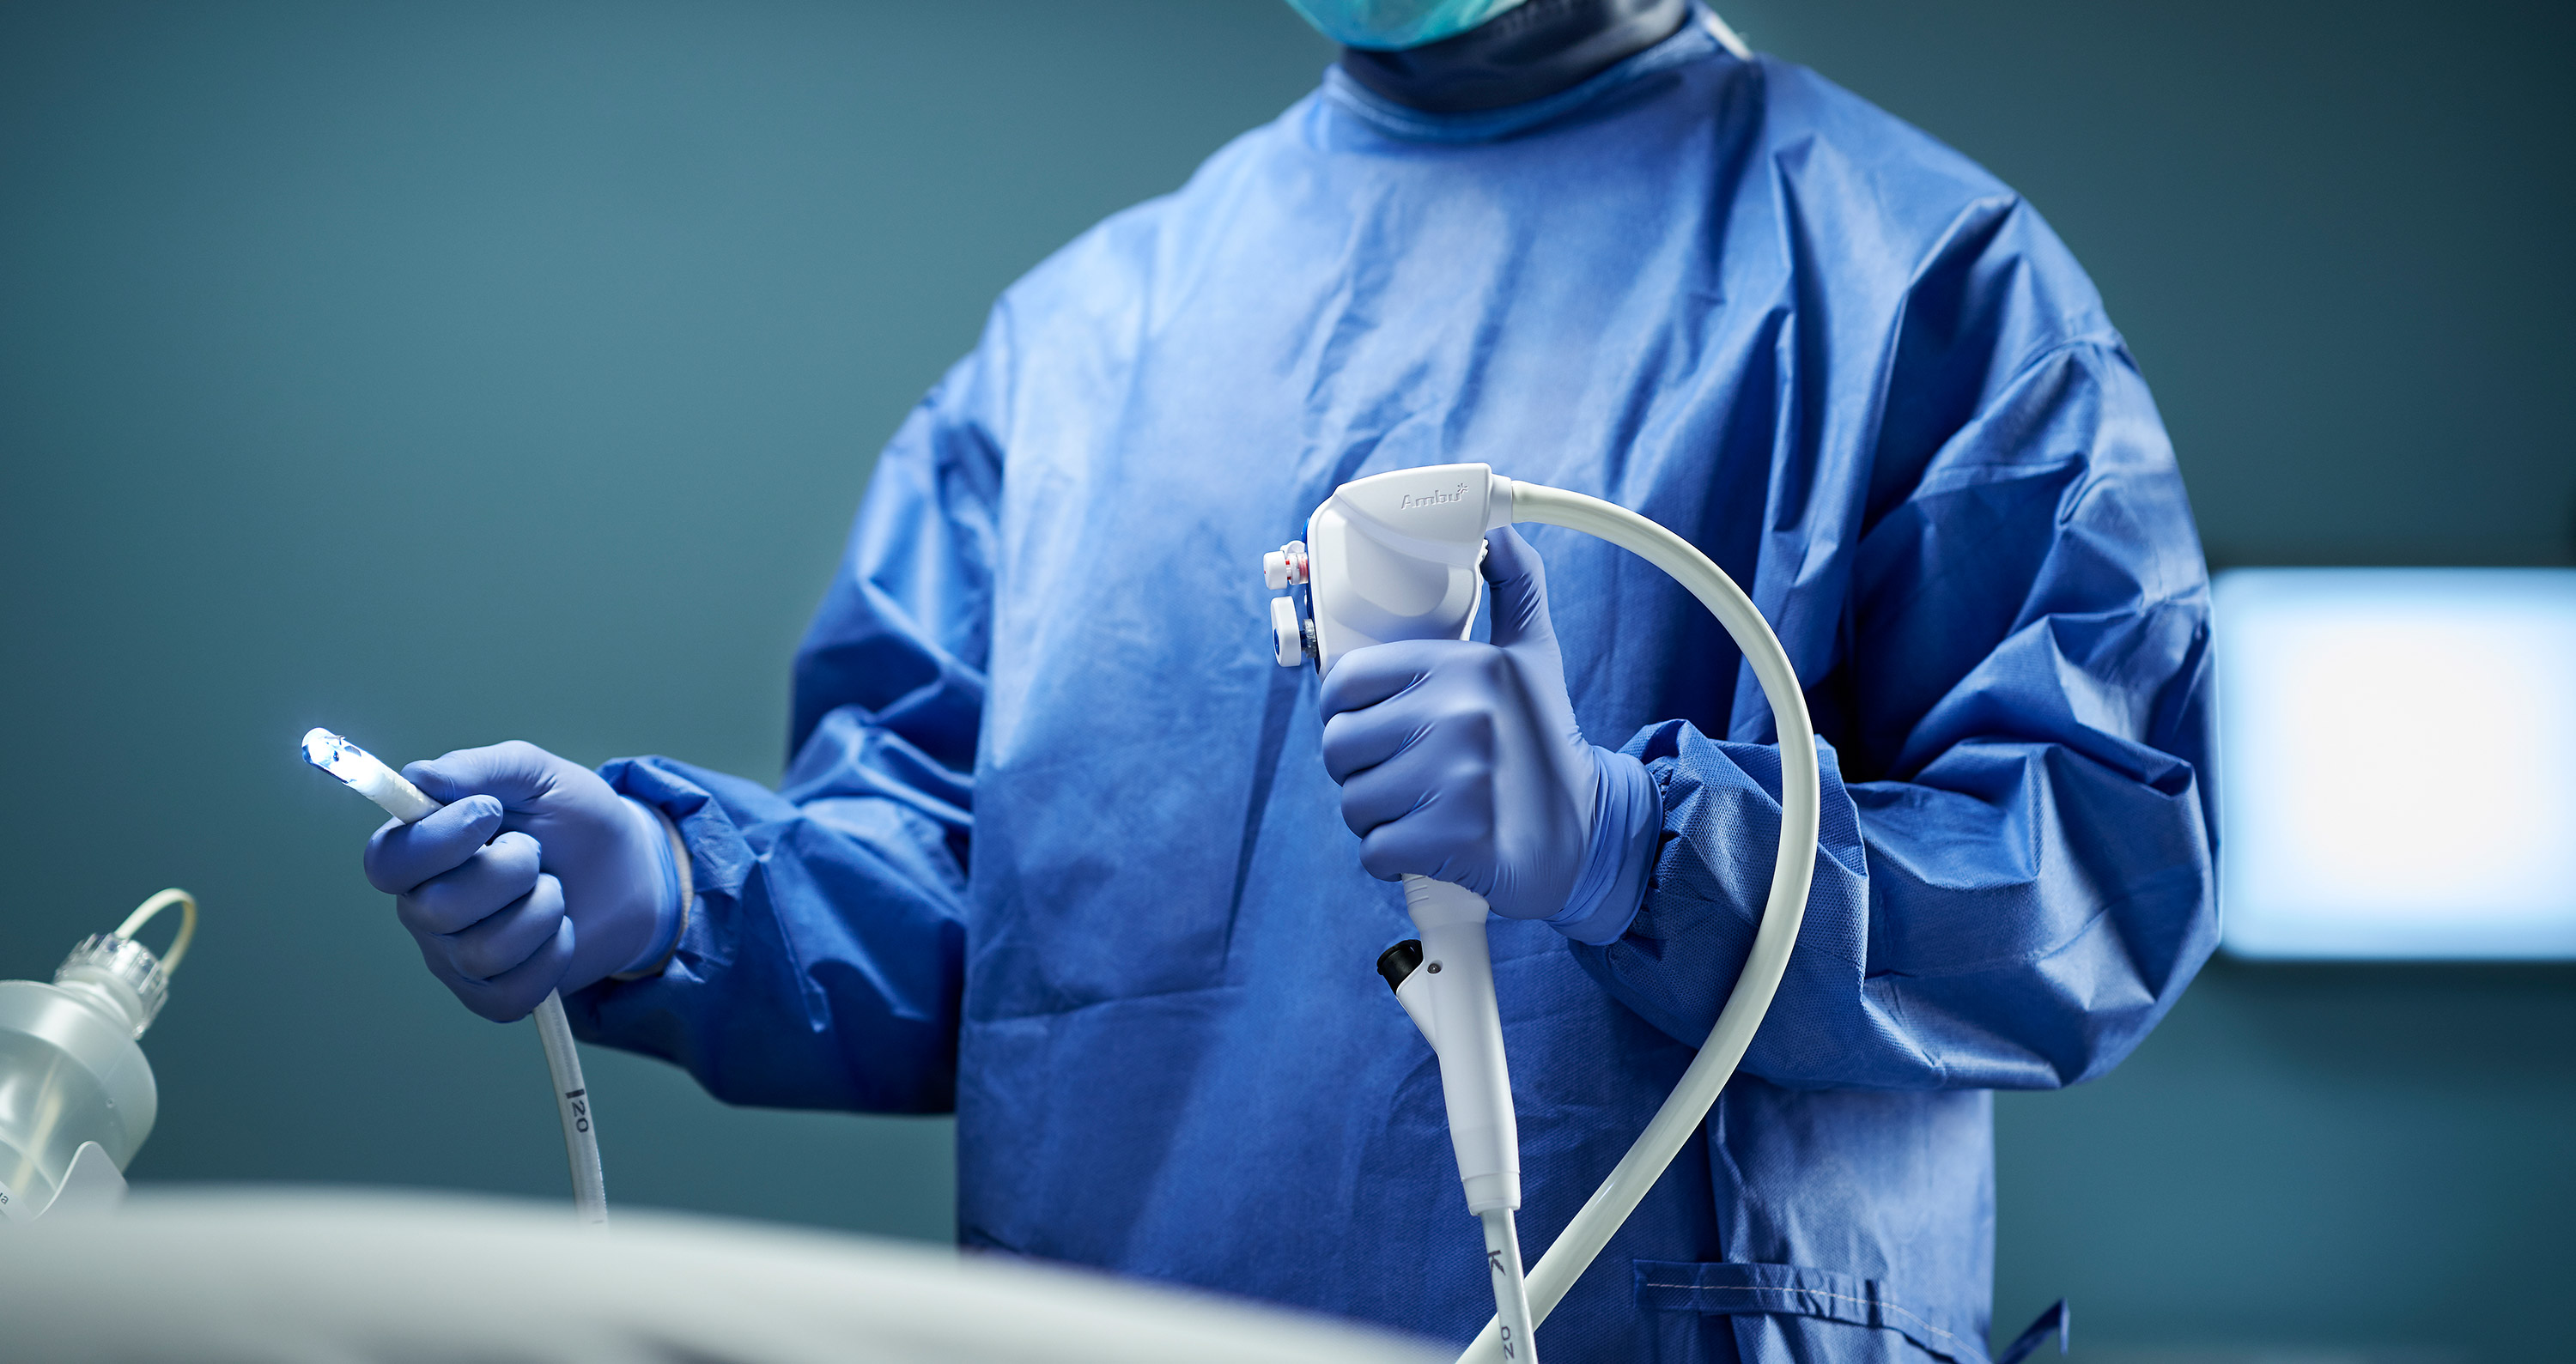 Study: Single-Use Duodenoscopes Are Capable of High Completion Rates in ERCP